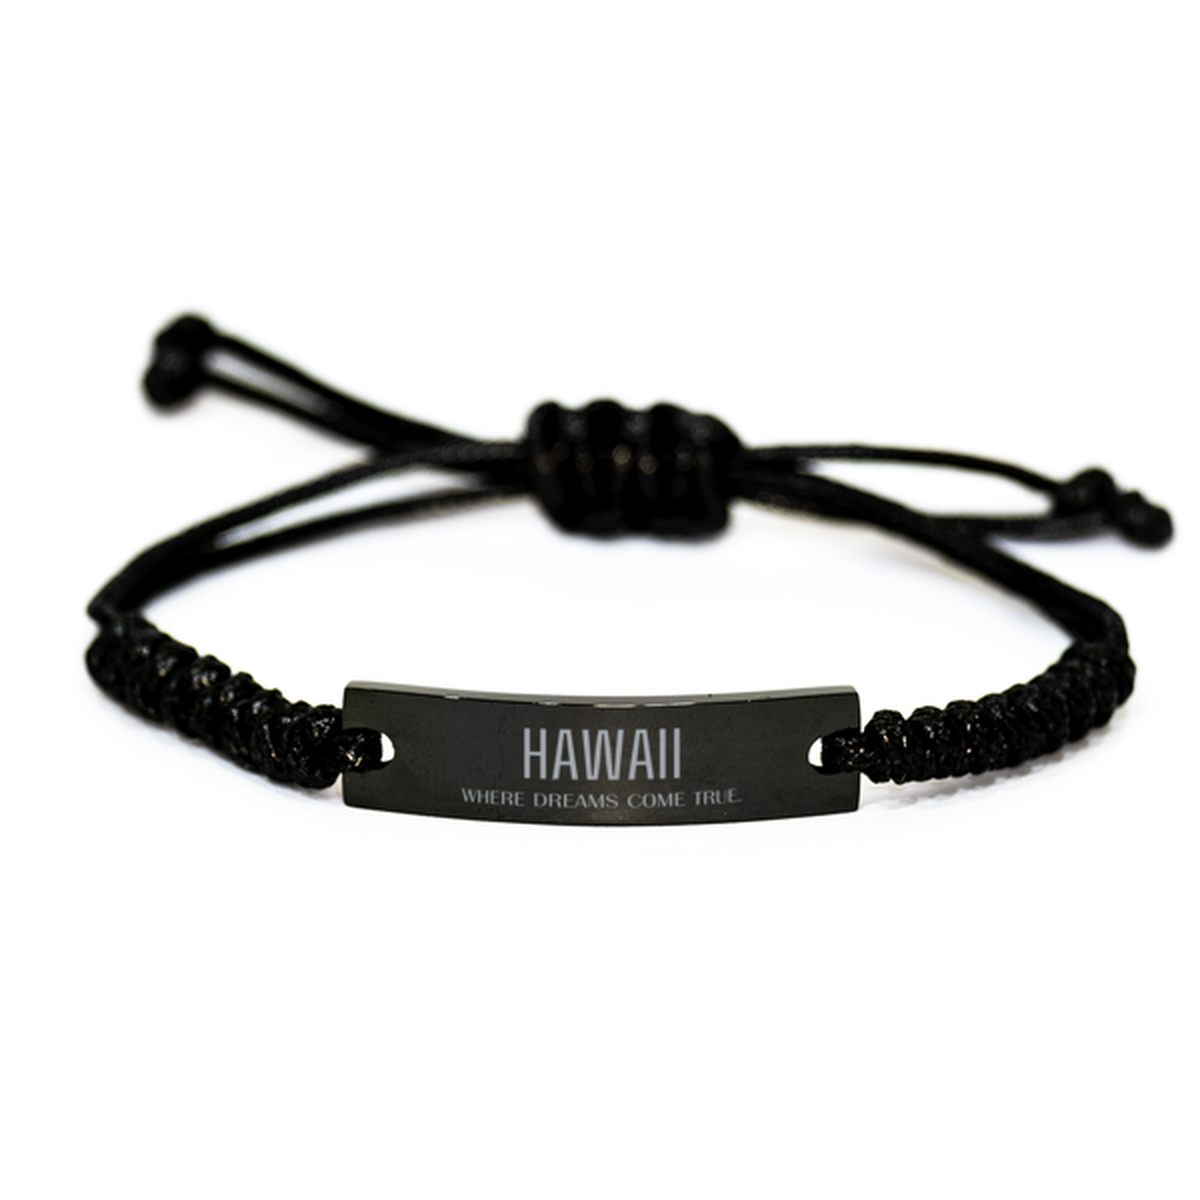 Love Hawaii State Black Rope Bracelet, Hawaii Where dreams come true, Birthday Inspirational Gifts For Hawaii Men, Women, Friends